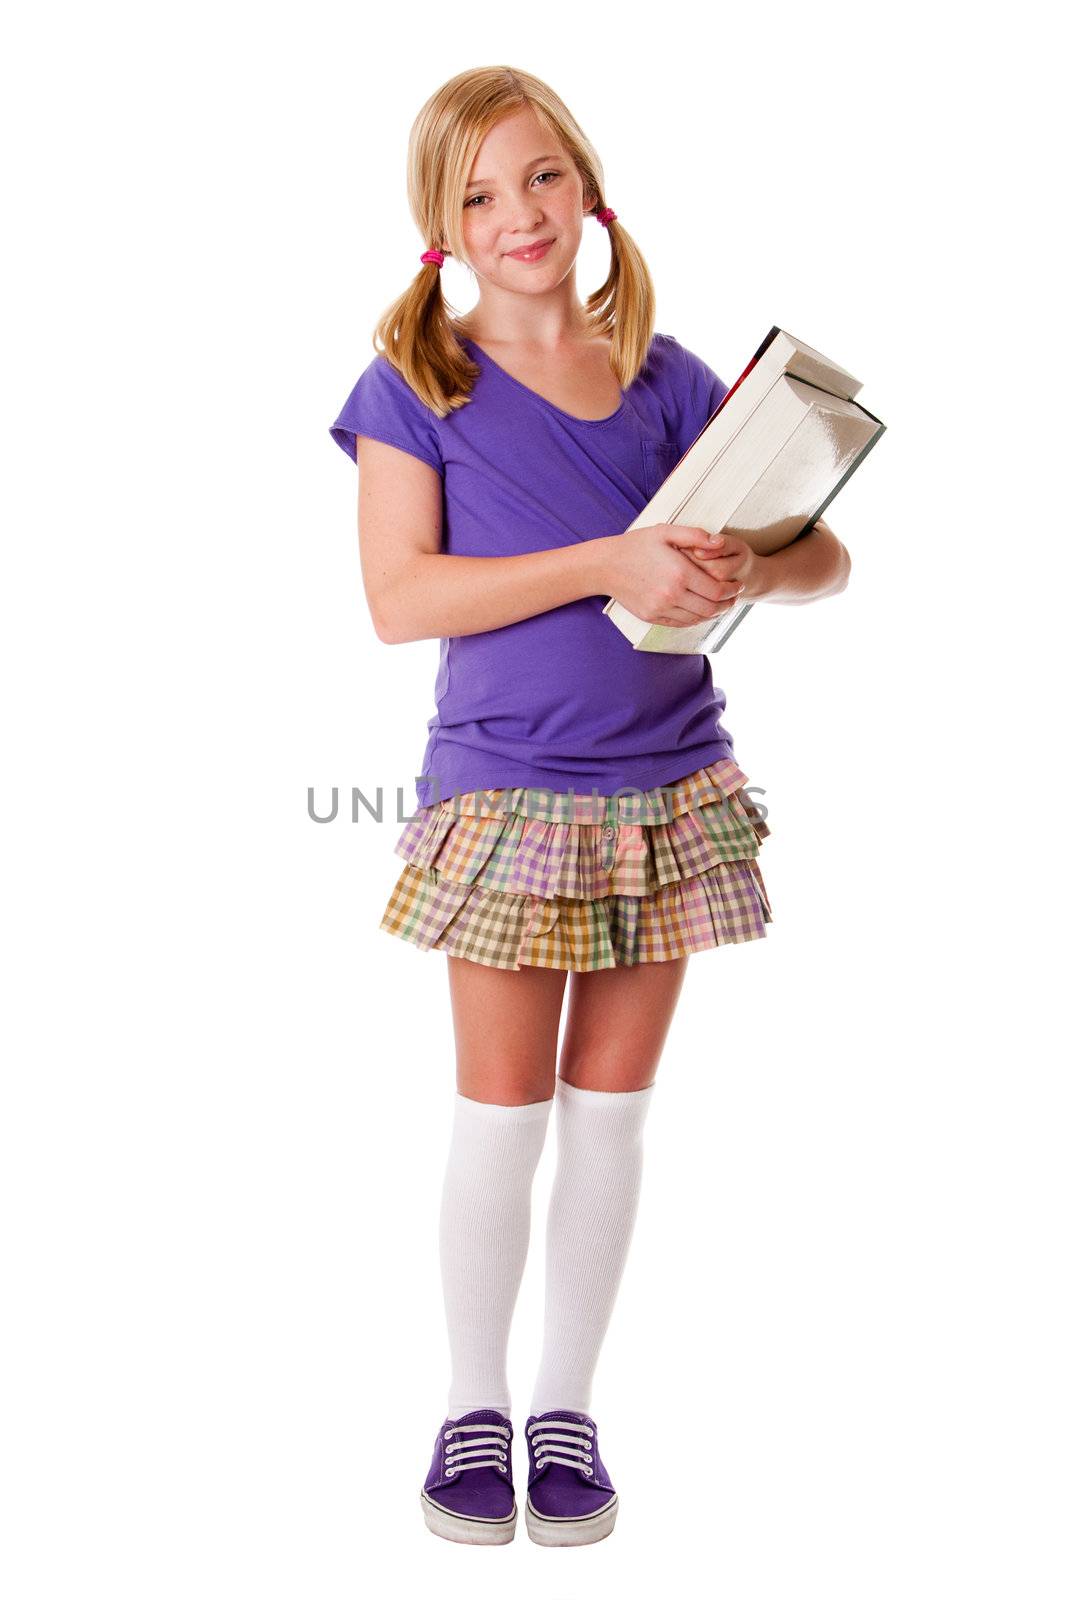 Beautiful happy teenager school girl carrying books, standing and smiling, isolated.